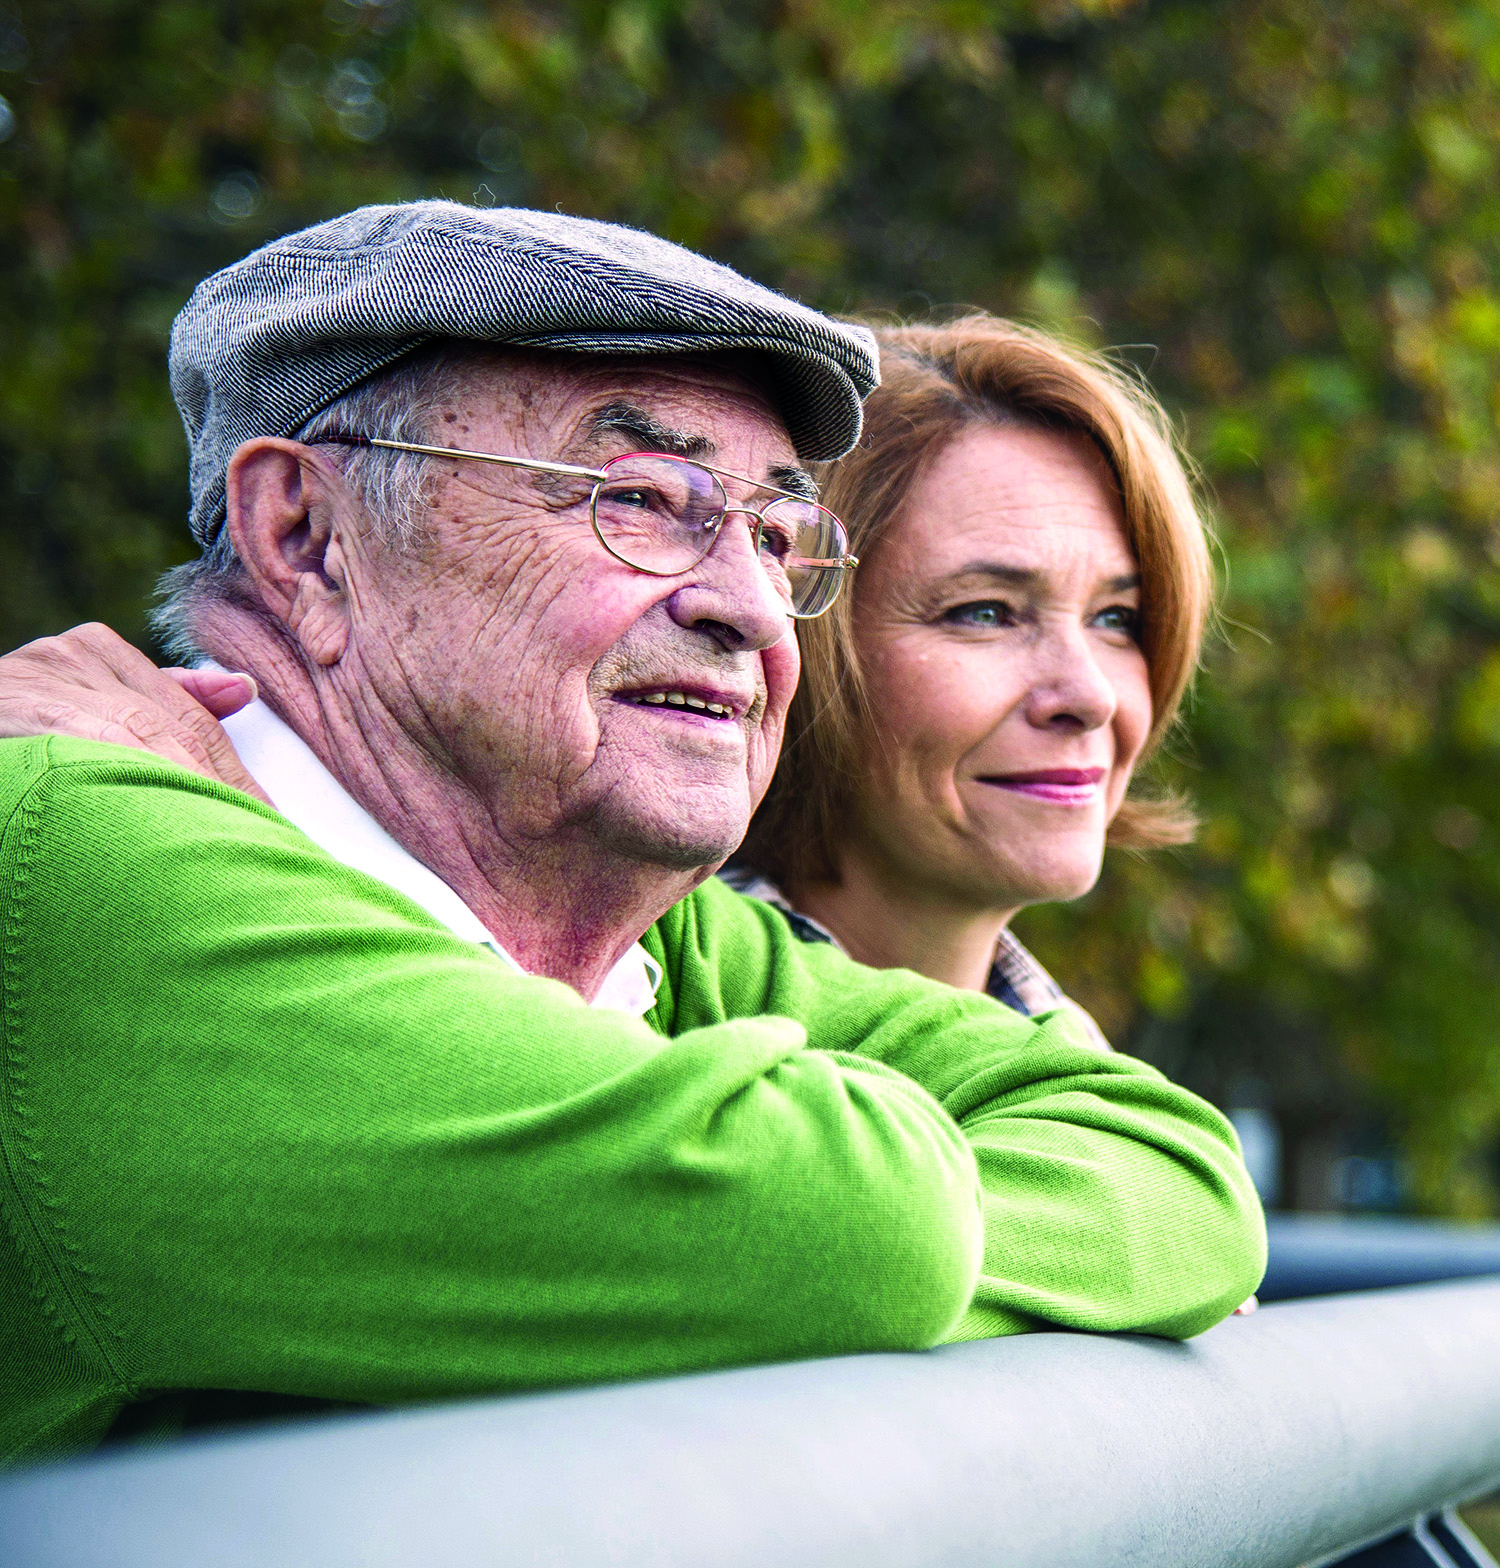 A senior man and his daughter sitting on a bench, smiling and enjoying each other's company in a park.